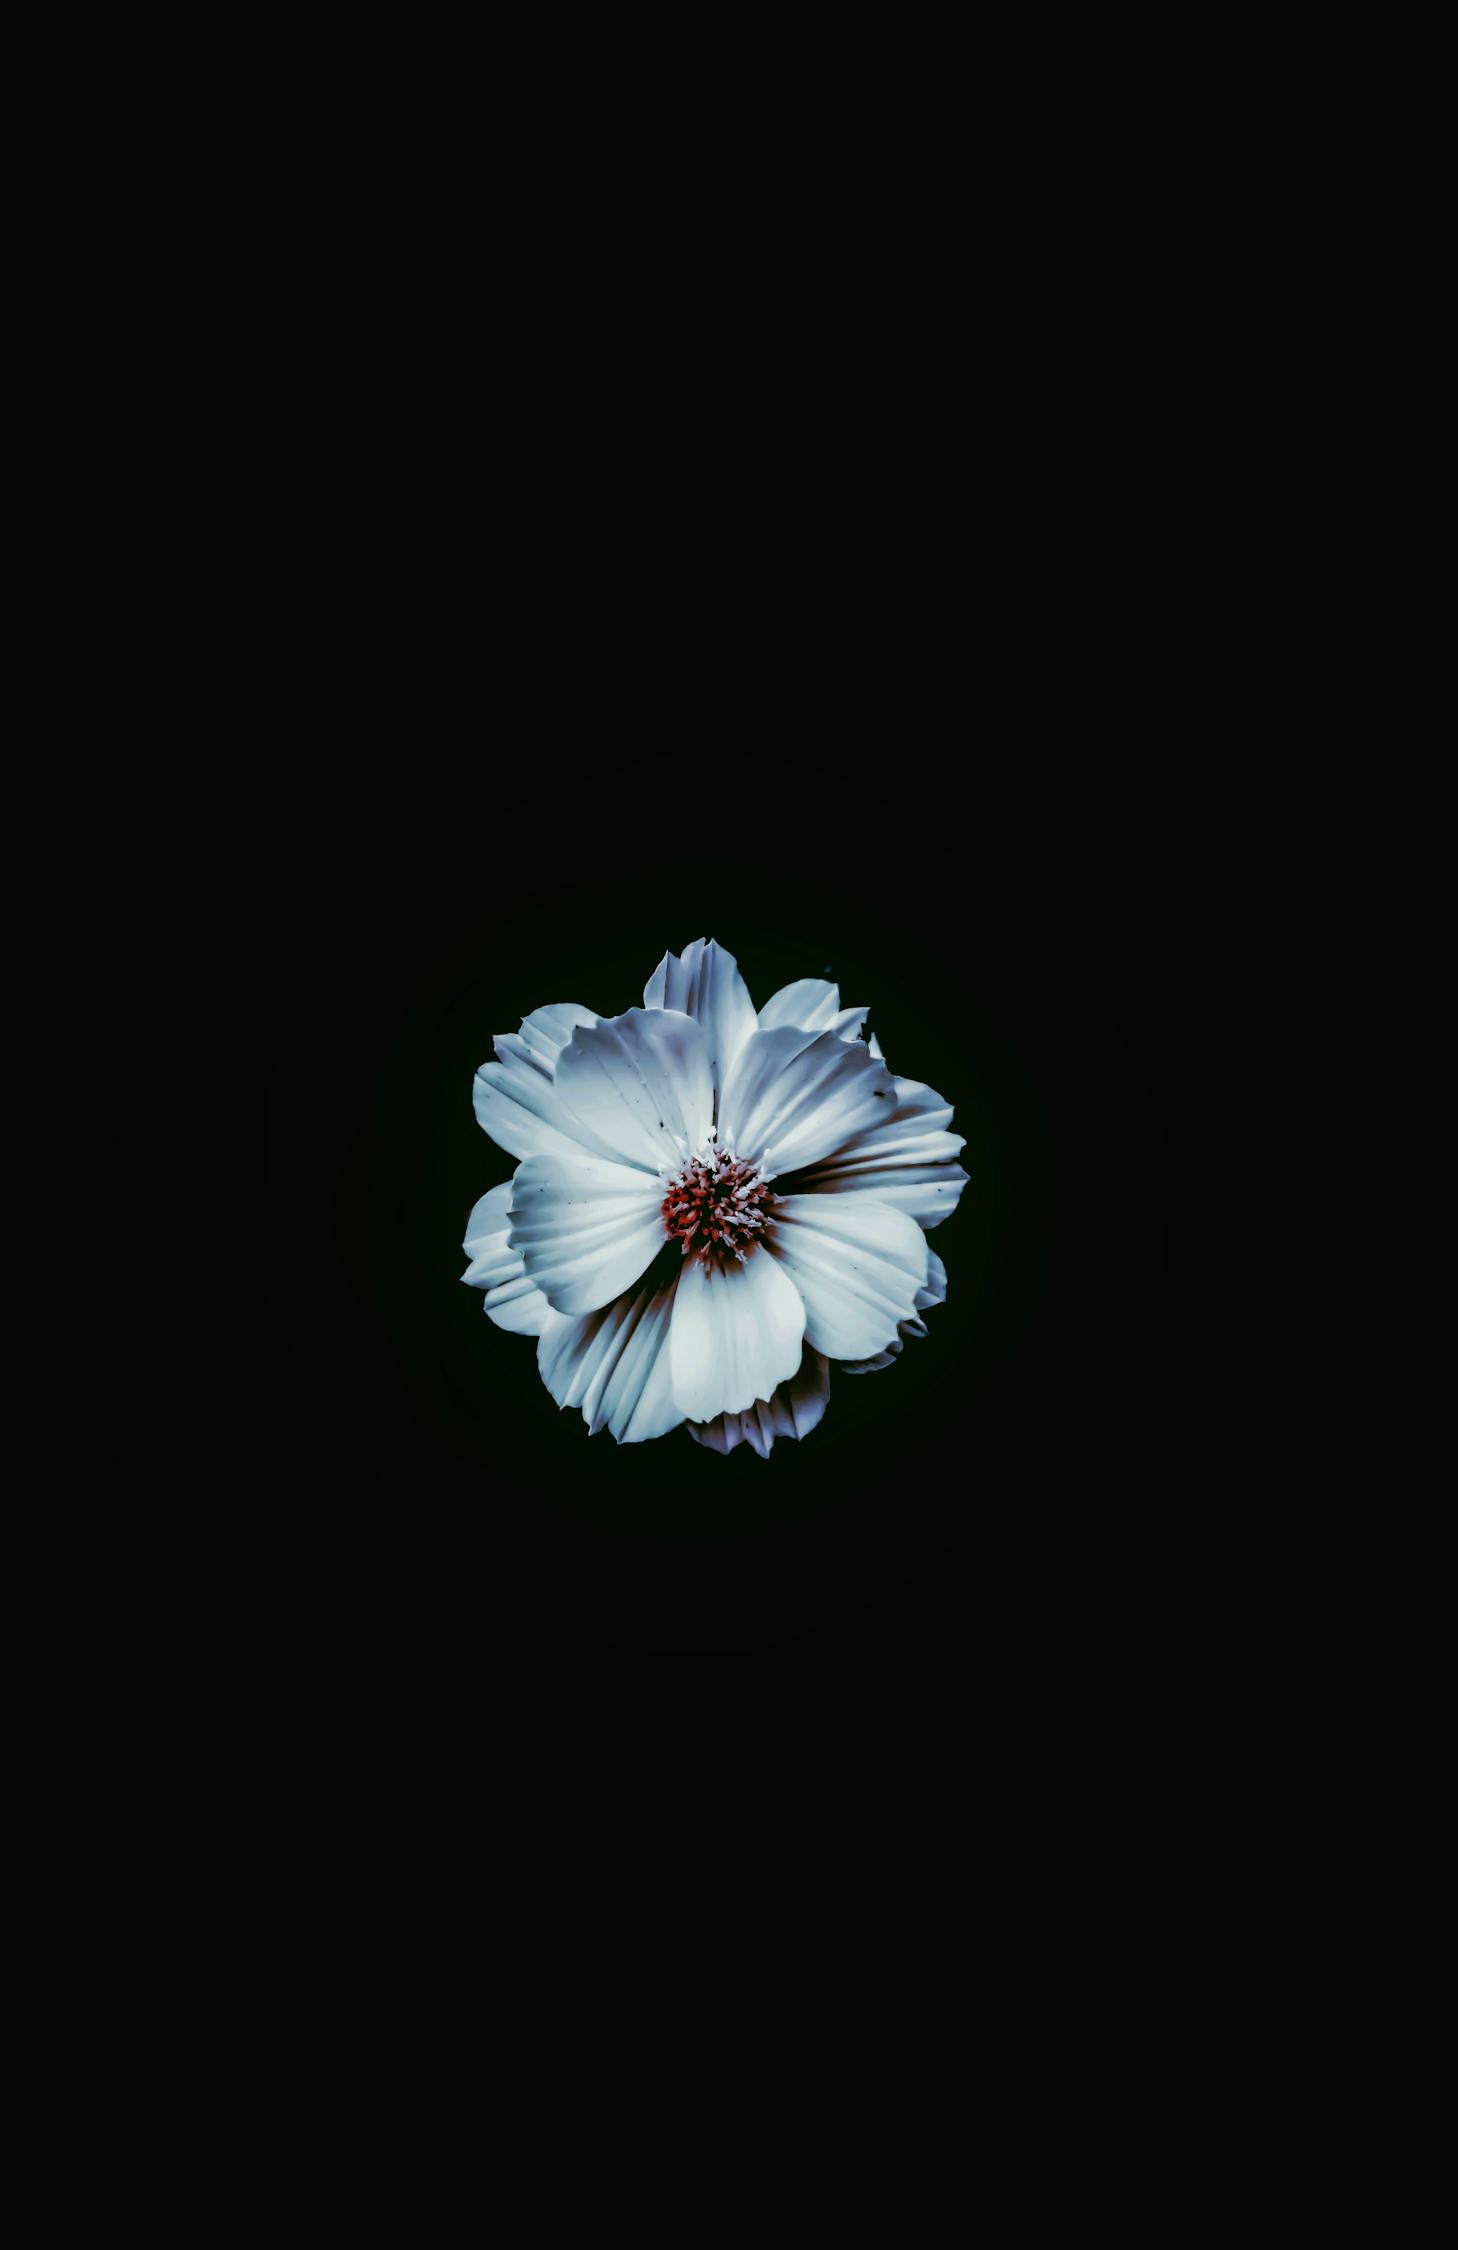 White Flower With Black Background · Free Stock Photo